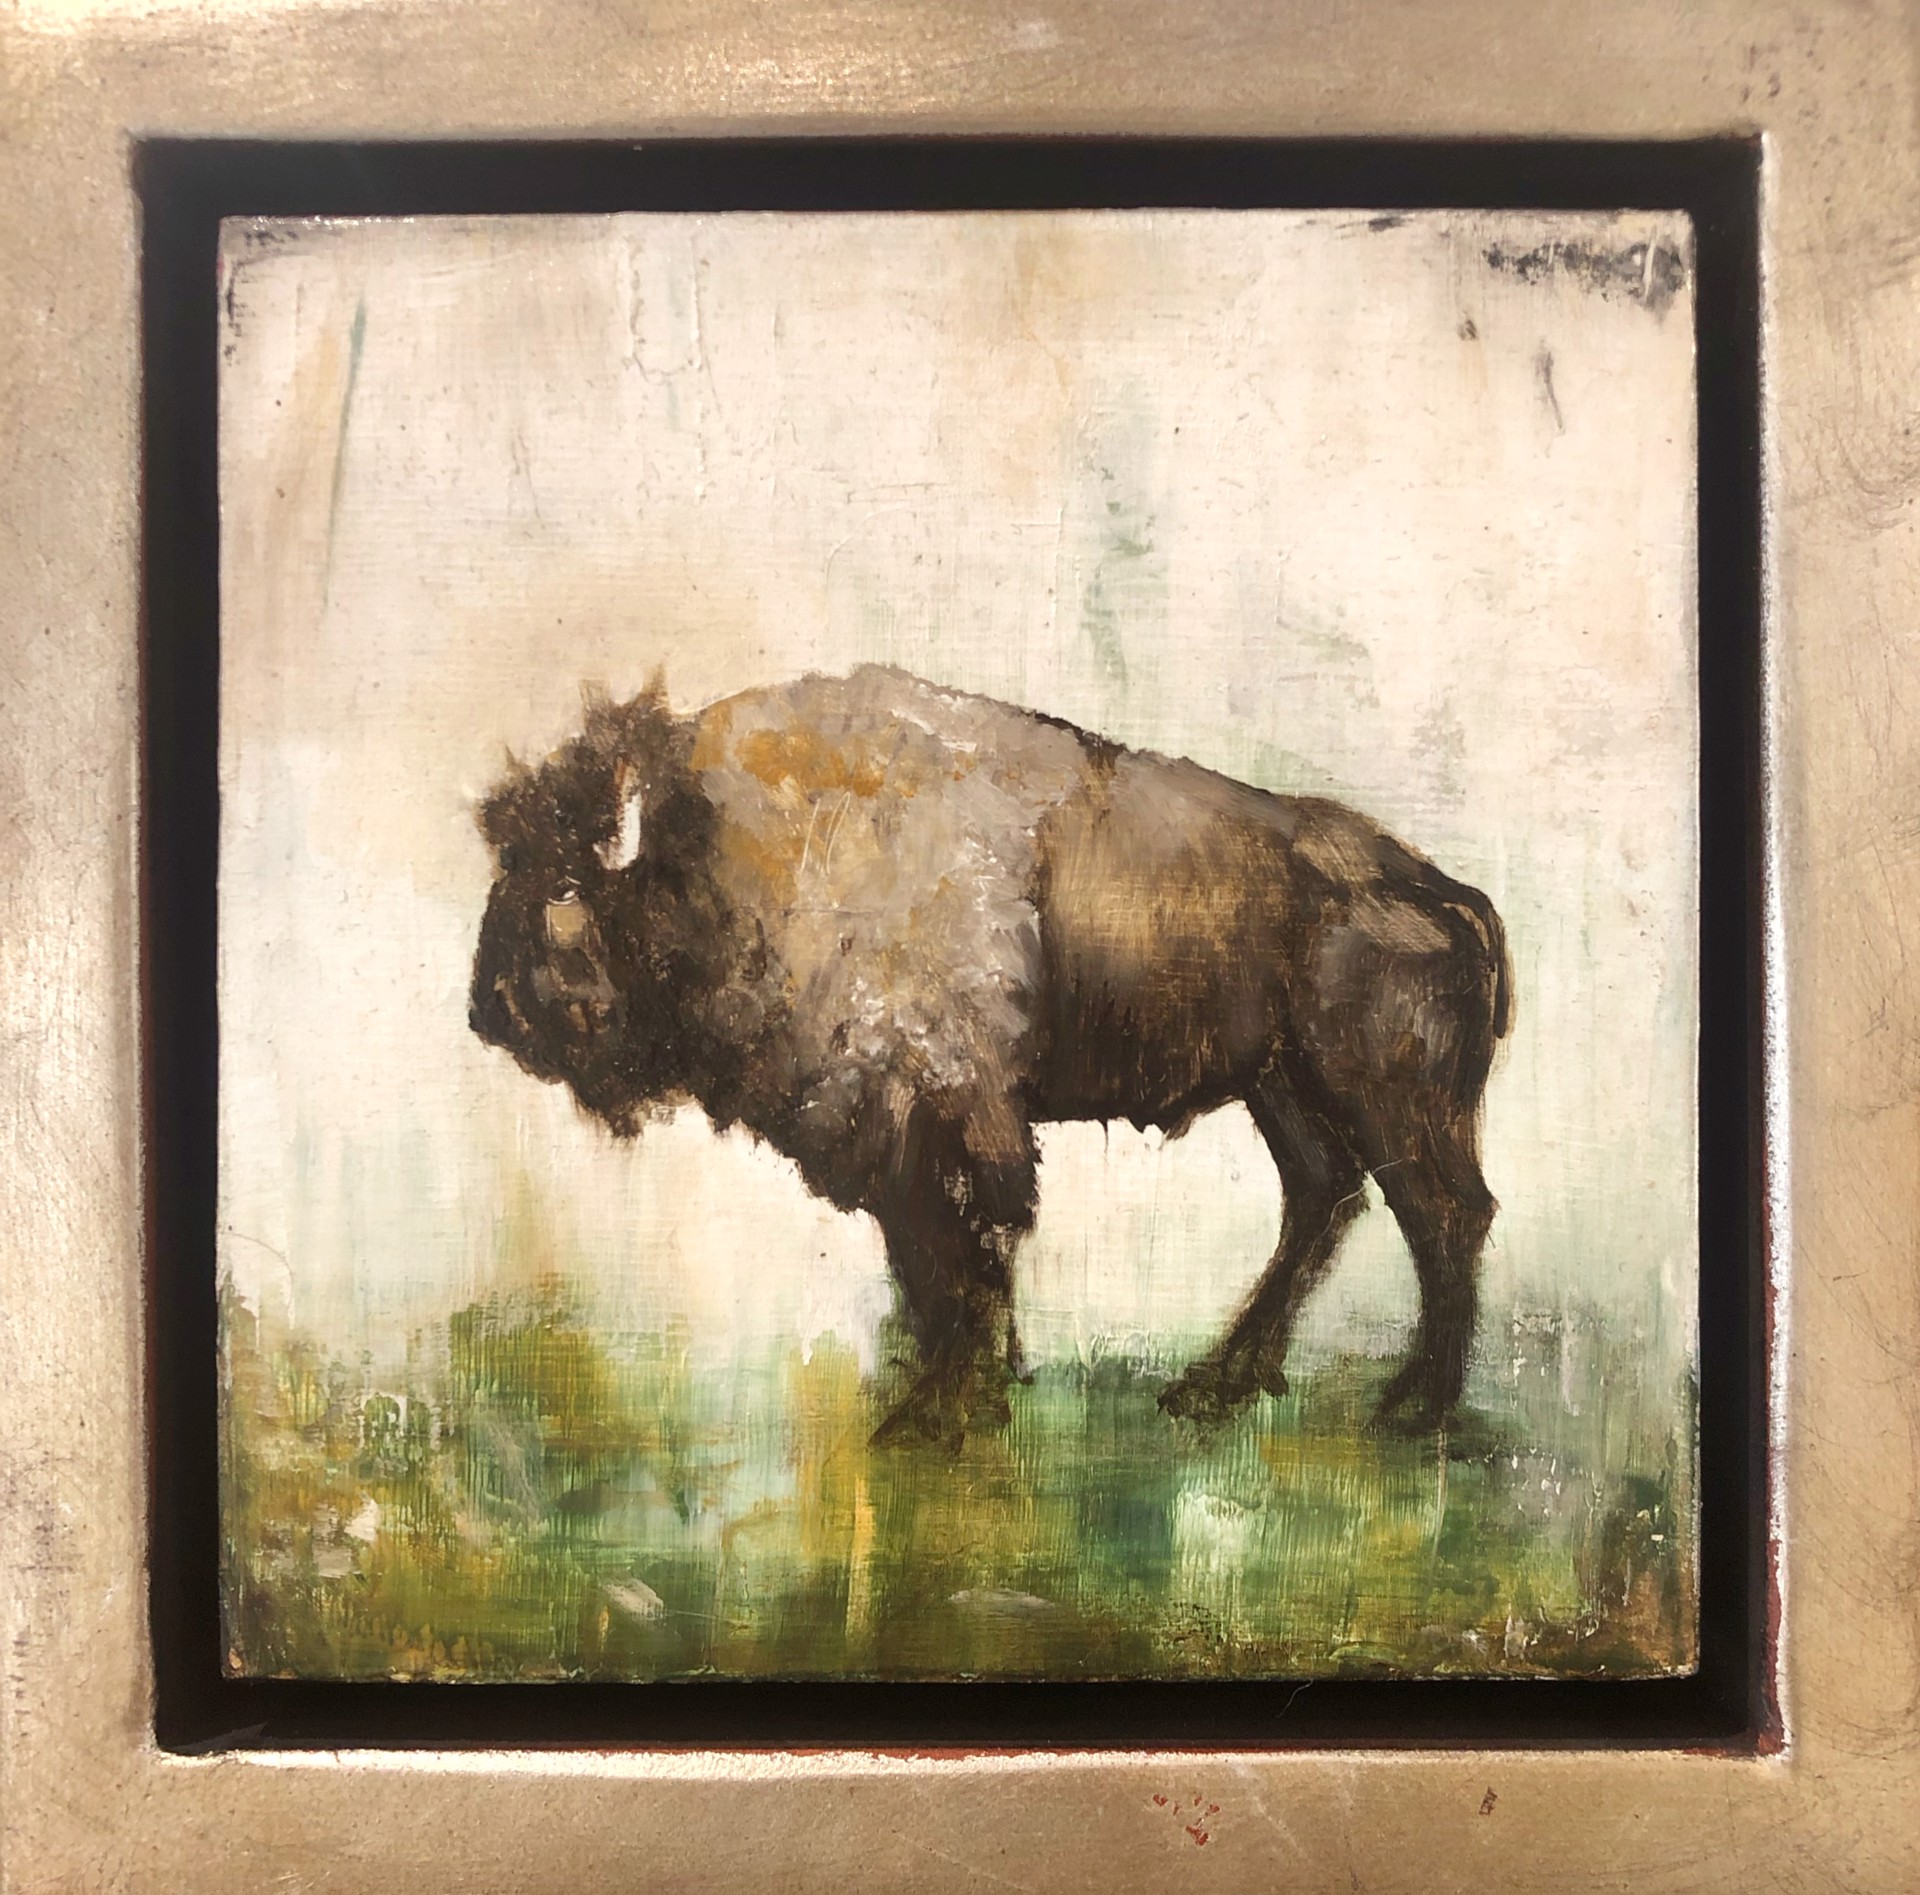 Original Painting Of A Bison Standing In Grass With A Contemporary Cream Background, By Jenna Von Benedikt